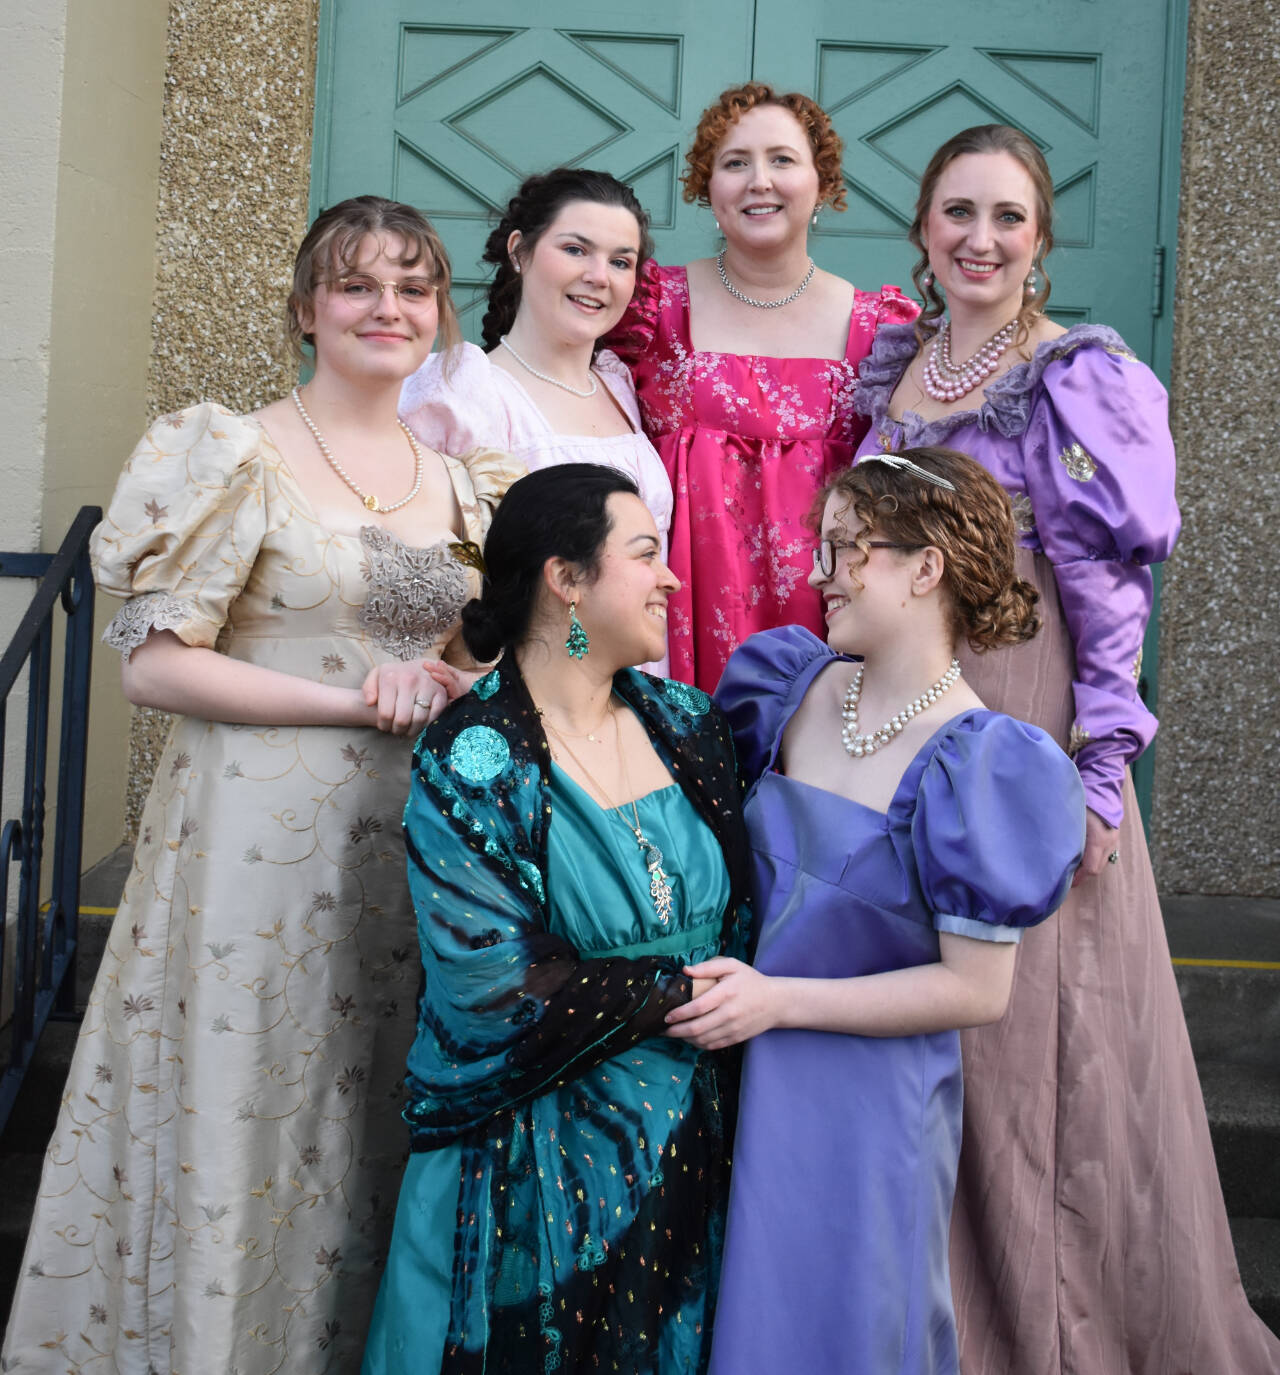 Photo courtesy of Port Angeles Community Players
Cast members of “Georgiana & Kitty - Christmas At Pemberley” enjoy a recent Jane Austen Tea. Pictured are (back row, from left) Wesley Vollmer, Olivia Wray, Cecie Gonzales McClelland and Sunshine Pederson, and (front row, from left) Poet XIX and Belle Robinson.
Photo courtesy of Port Angeles Community Players / Cast members of “Georgiana & Kitty — Christmas At Pemberley” enjoy a recent Jane Austen Tea. Pictured are (back row, from left) Wesley Vollmer, Olivia Wray, Cecie Gonzales McClelland and Sunshine Pederson, and (front row, from left) Poet XIX and Belle Robinson.